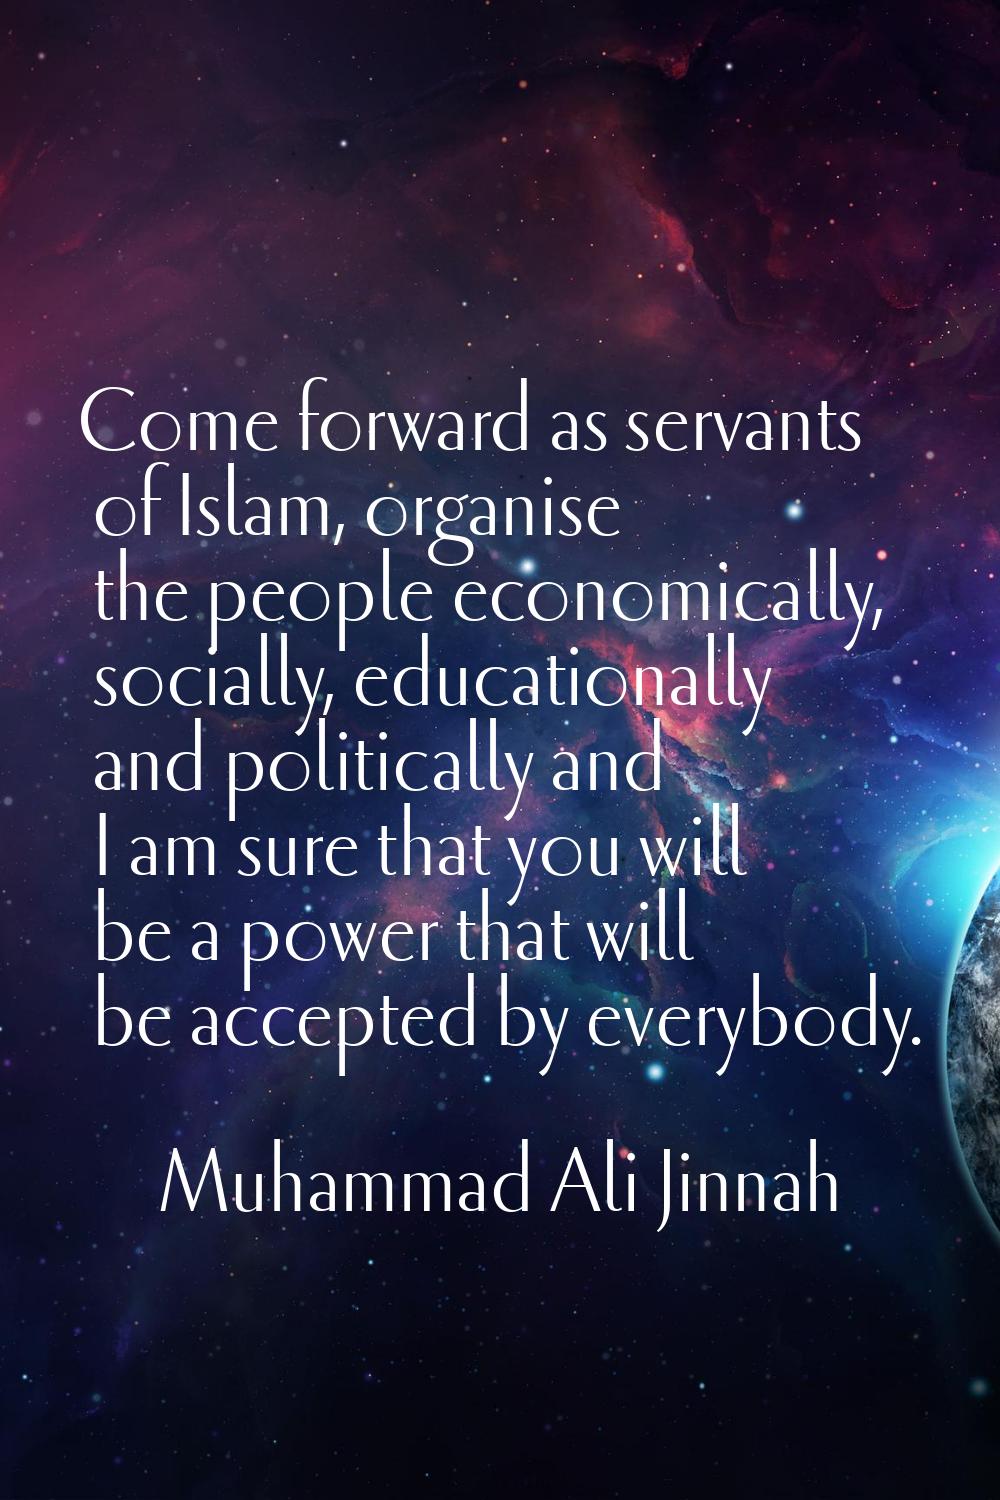 Come forward as servants of Islam, organise the people economically, socially, educationally and po